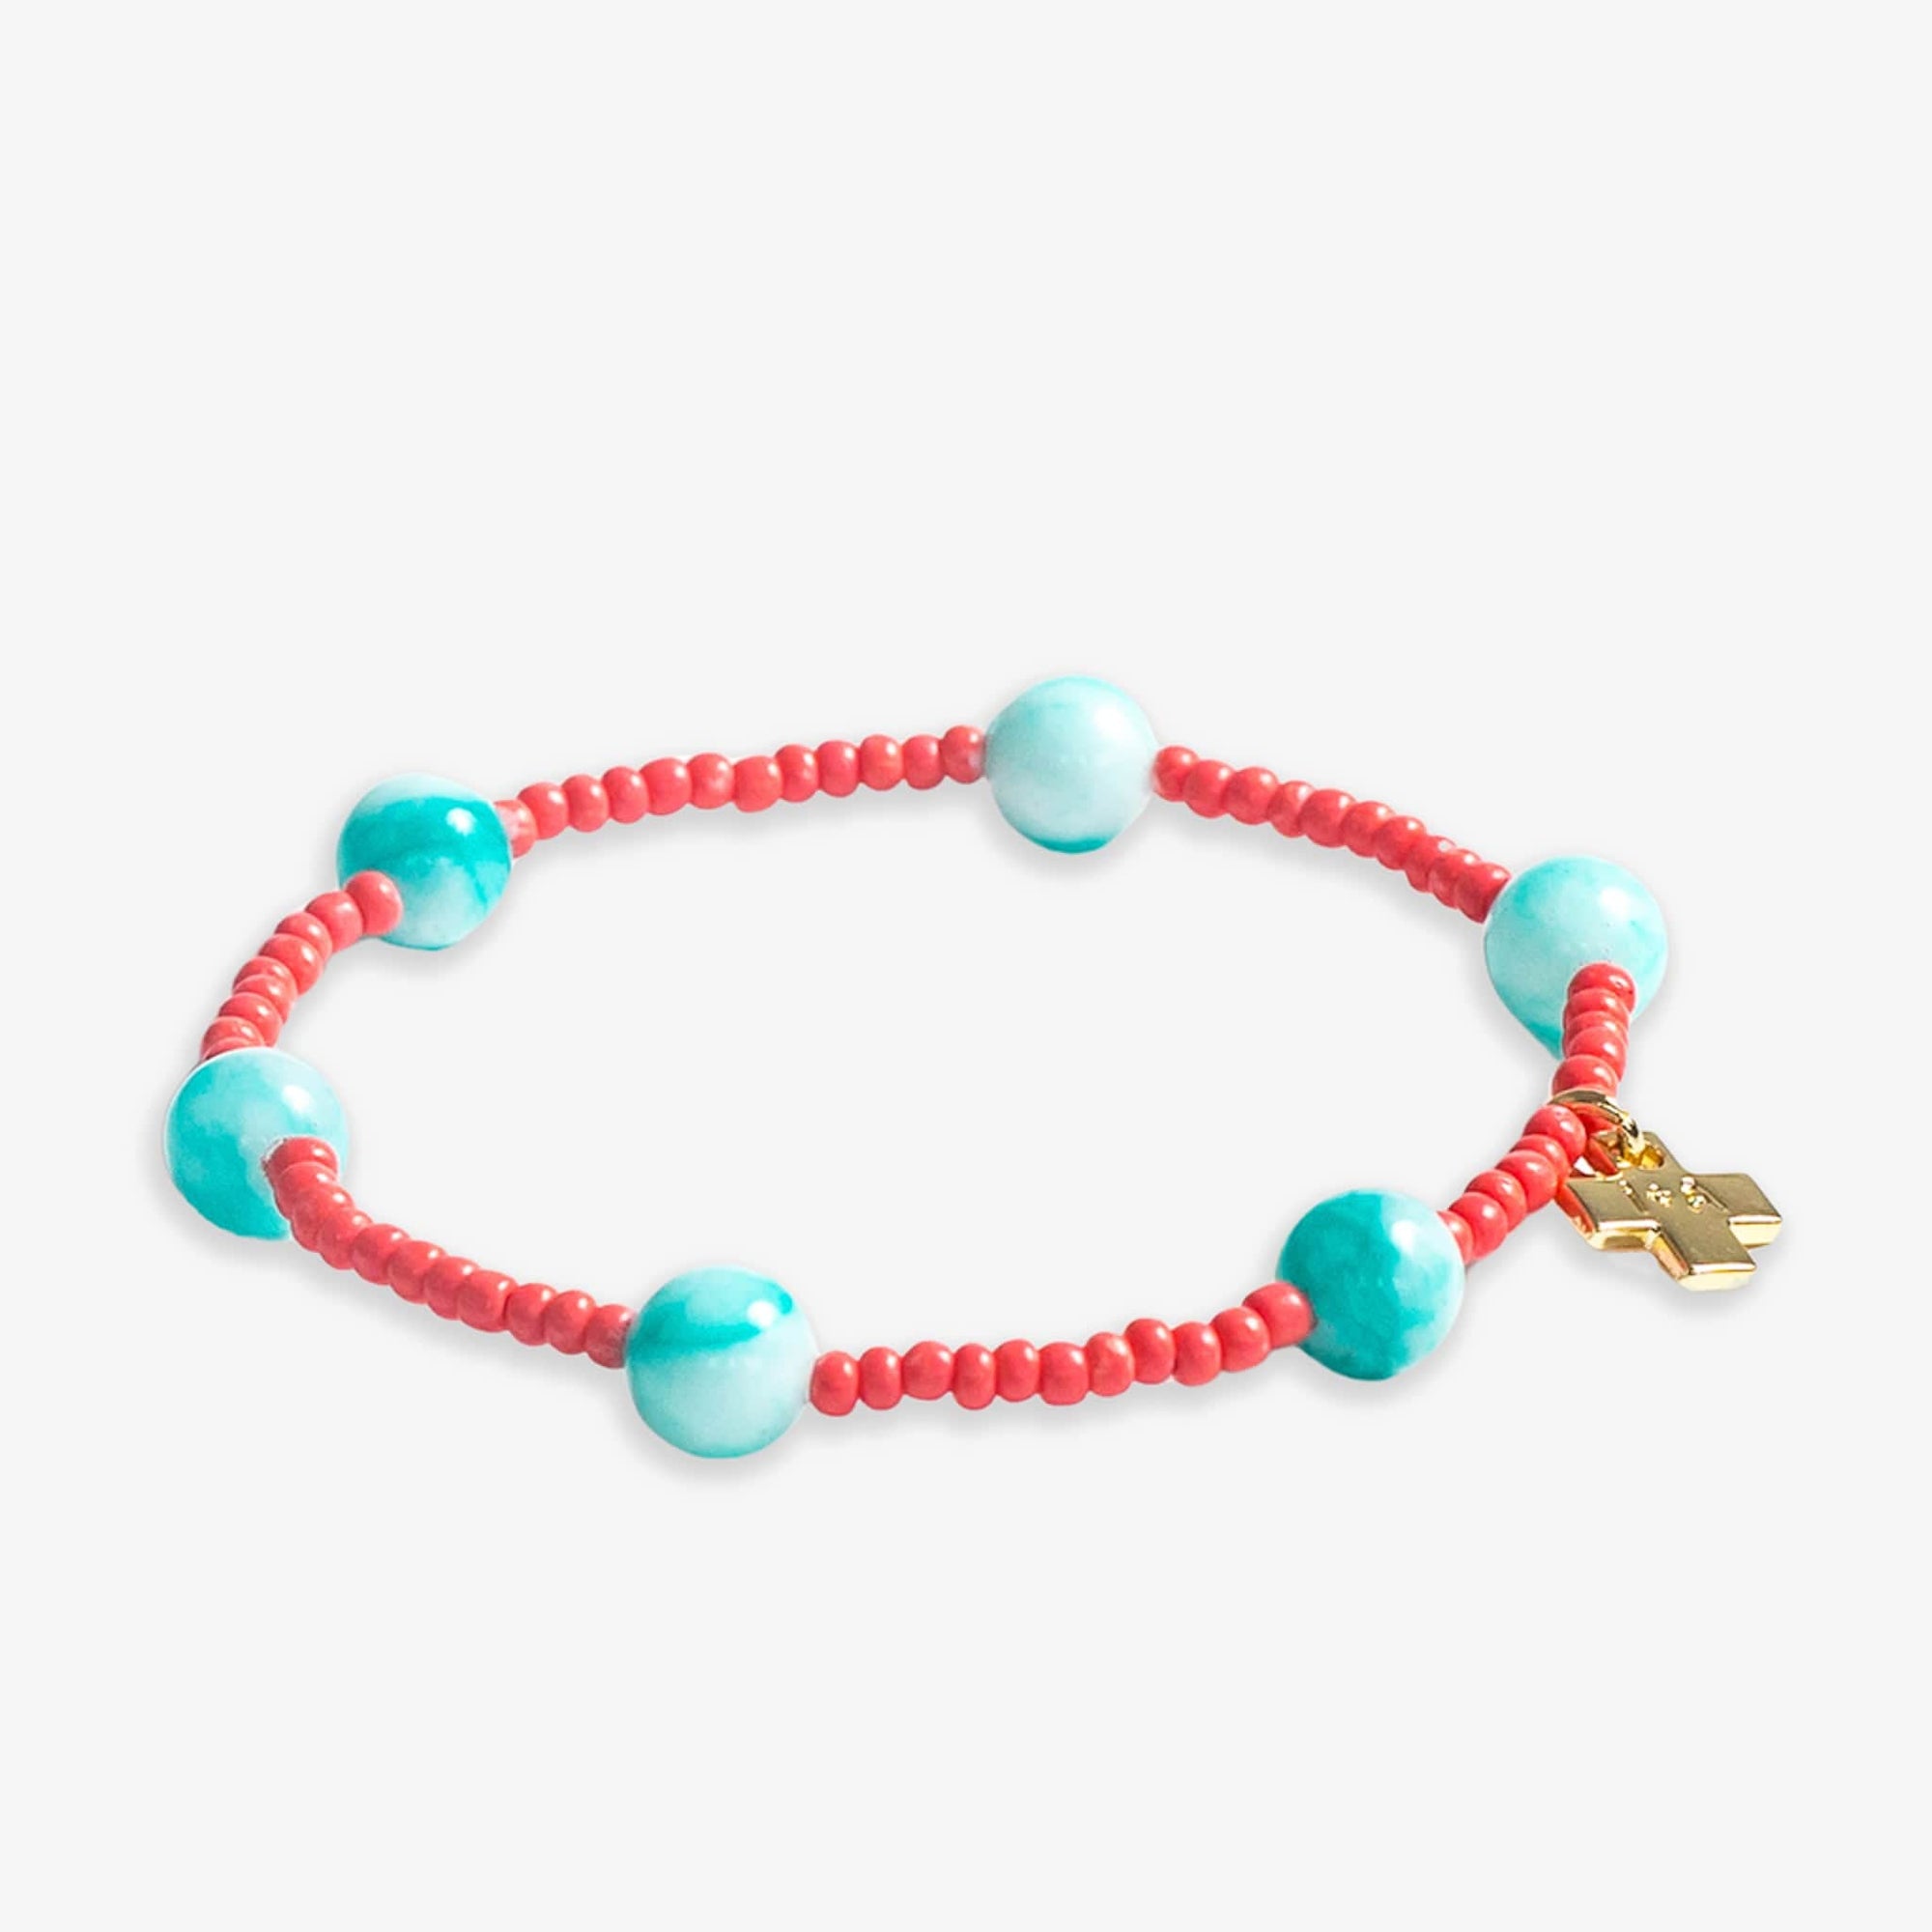 Mia Small Seed Bead With Round Stones Stretch Bracelet Coral/Turquoise Wholesale